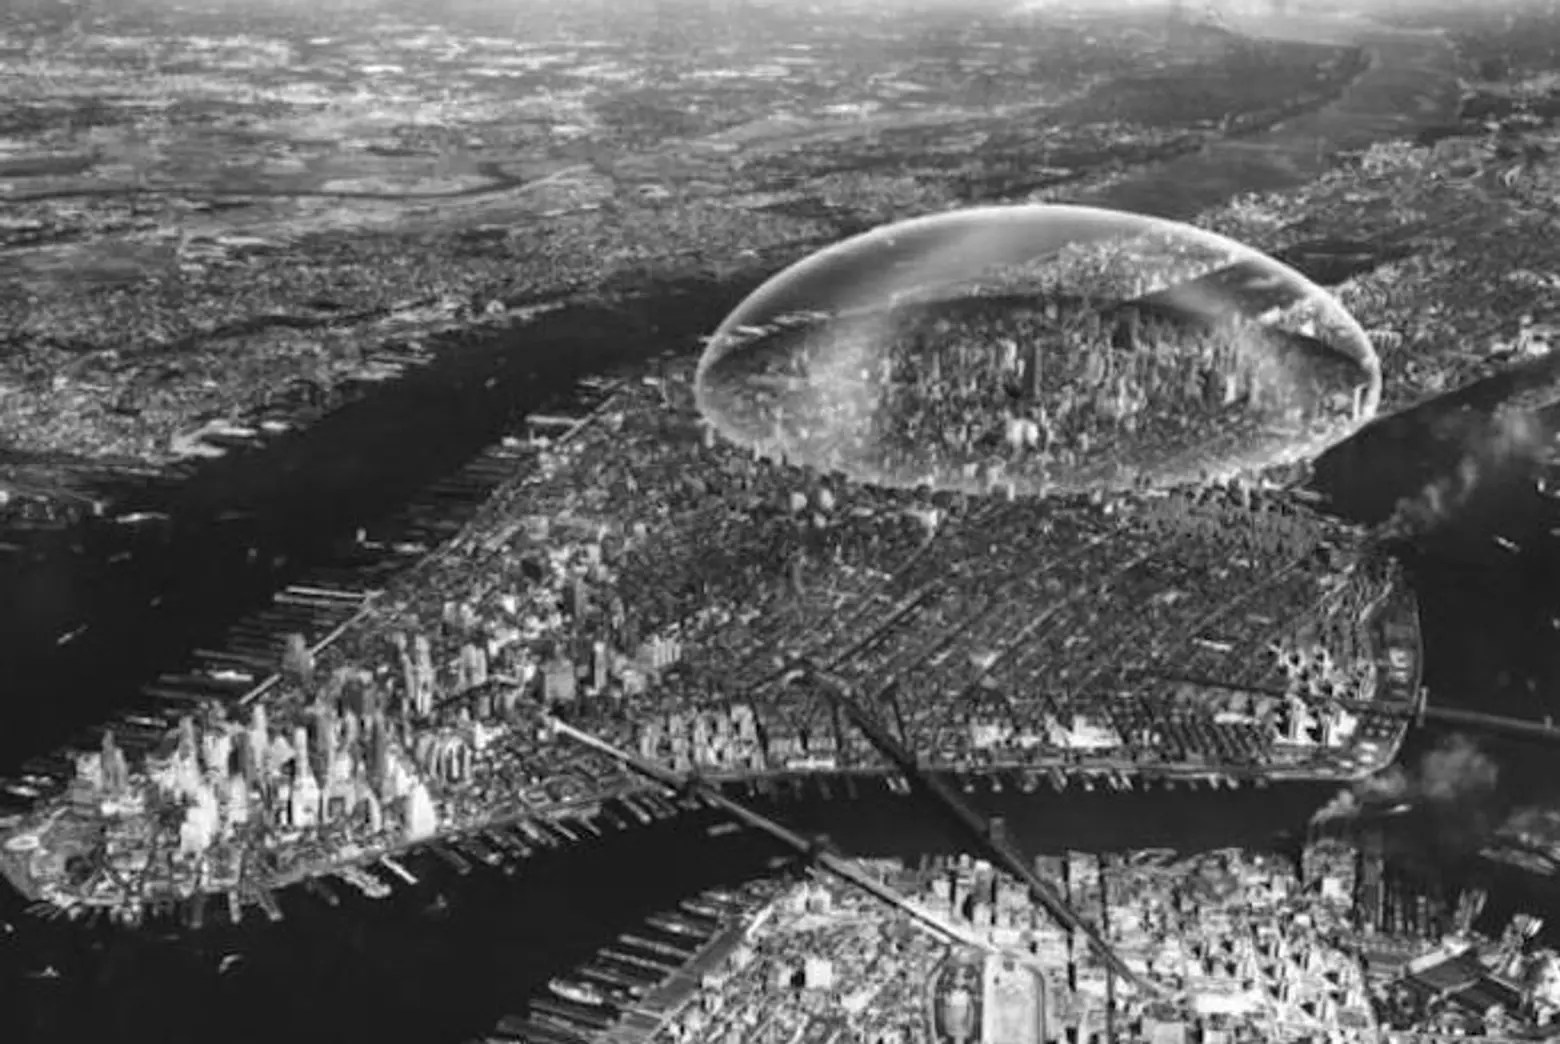 A 1960s Plan to Cover Midtown Manhattan With a Giant Geodesic Dome